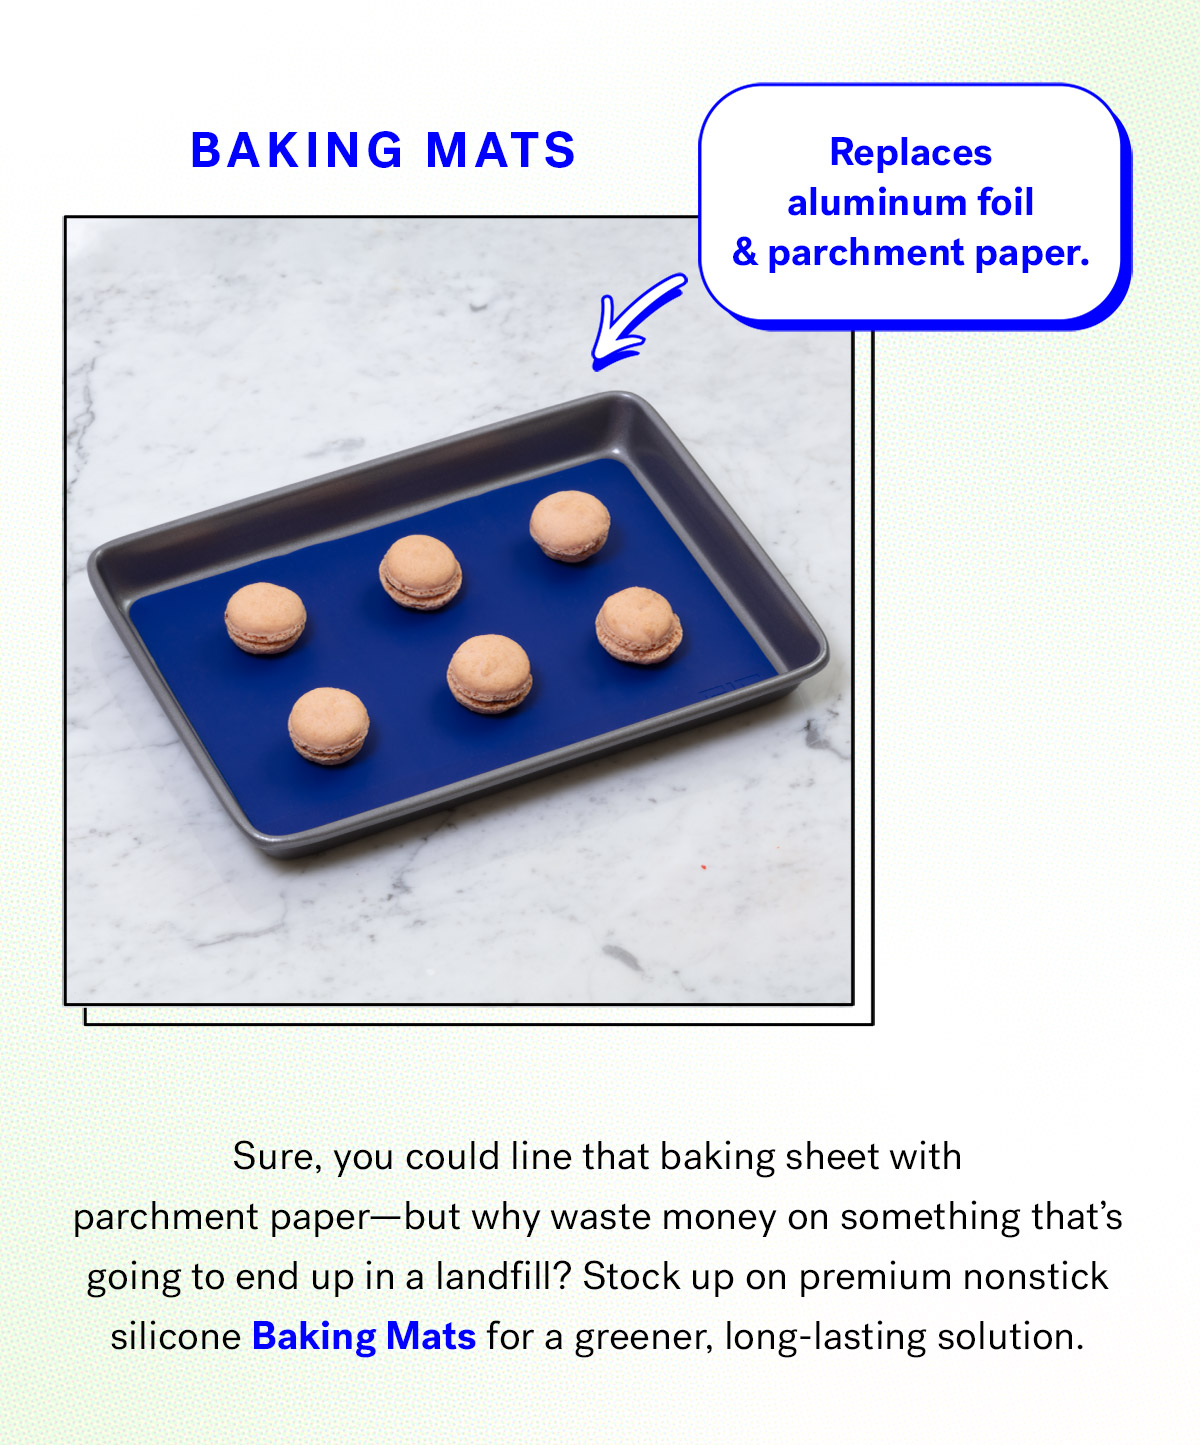  
                                
                                Baking Mats
                                Replaces aluminum foil and parchment paper

                                Sure, you could line that baking sheet with parchment paper--but why waste money on something that's going to end up in a landfill? 
                                Stock up on premium nonstick silicone Baking Mats for a greener, long-lasting solution. 

                                Shop Baking Mats
                                